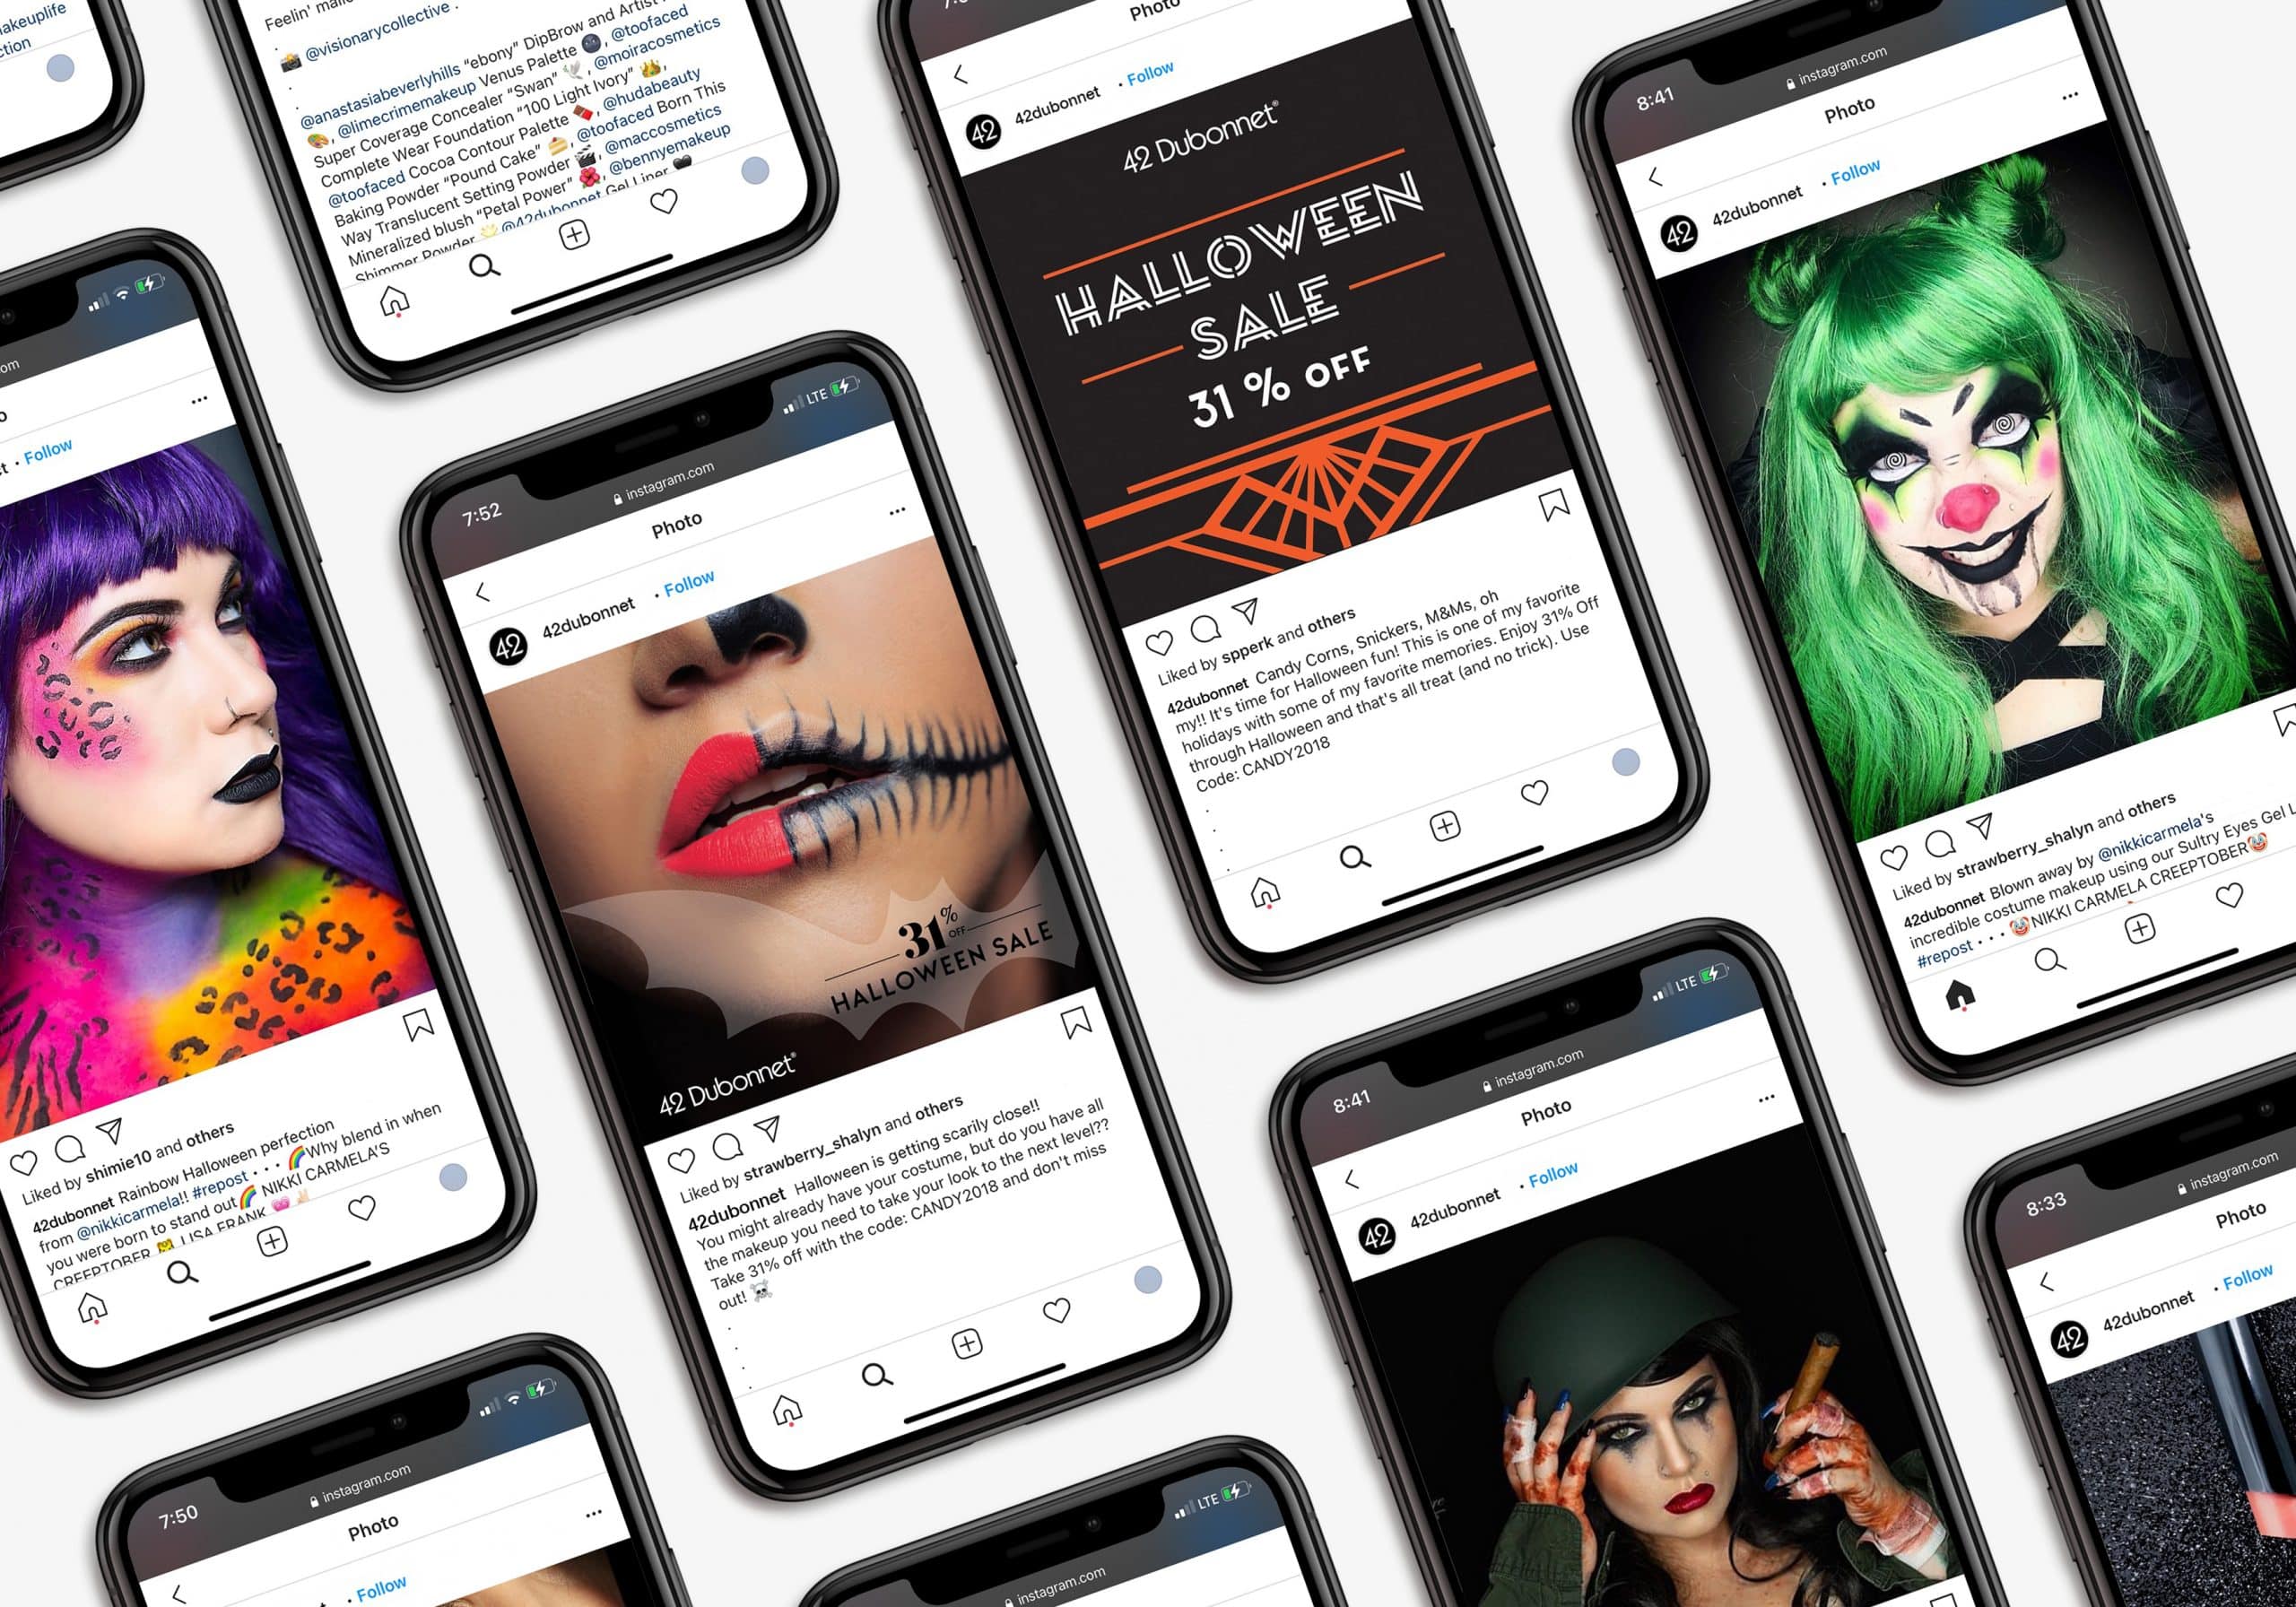 42 Dubonnet social media Halloween images shown on iPhones displayed in slanted rows against grey backdrop.